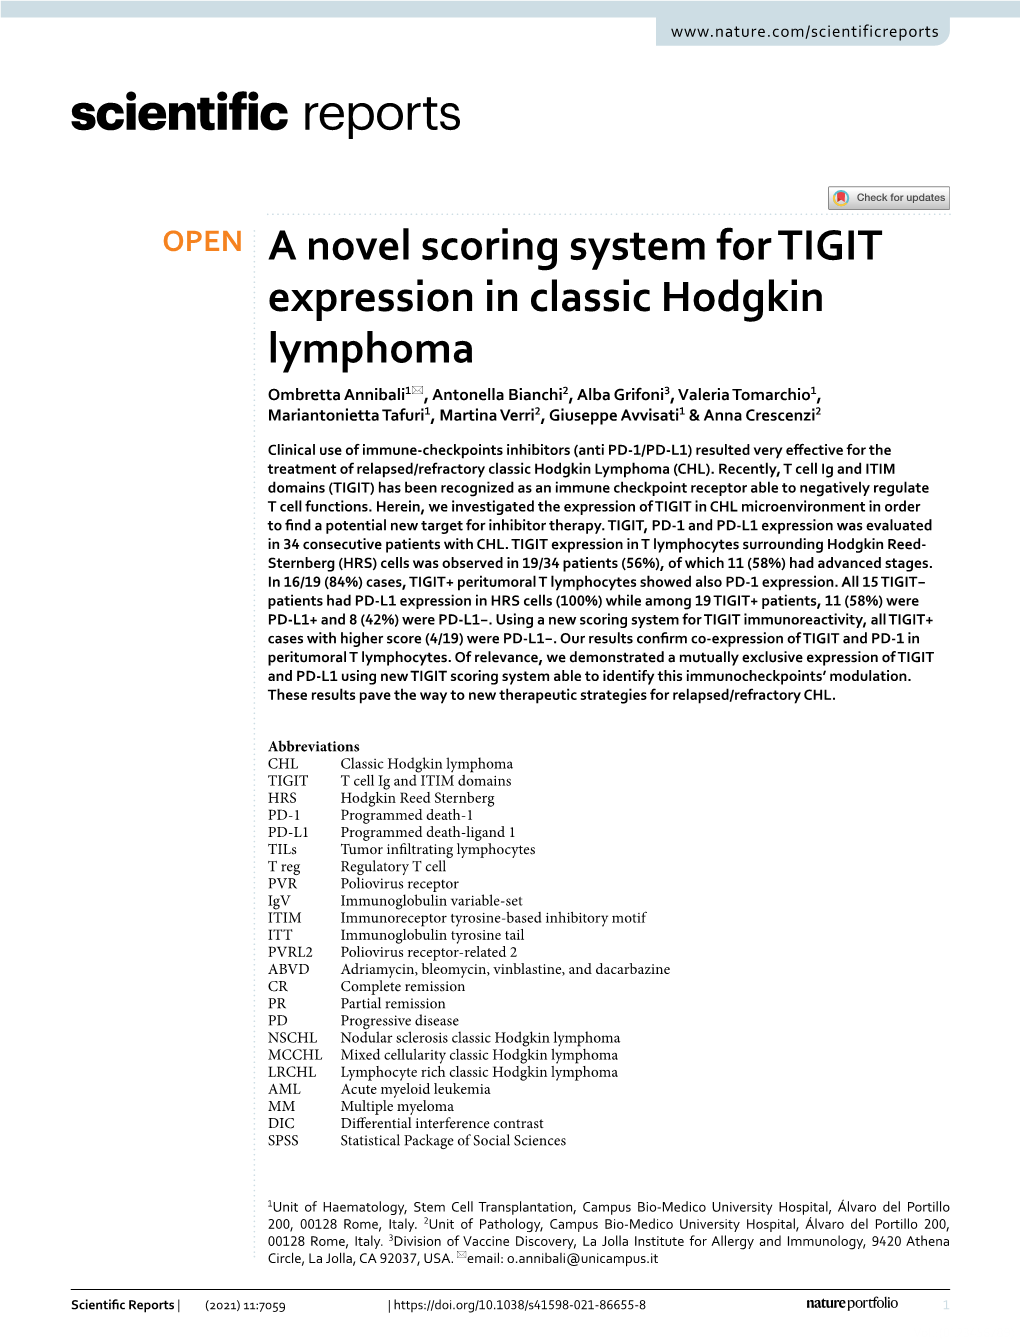 A Novel Scoring System for TIGIT Expression in Classic Hodgkin